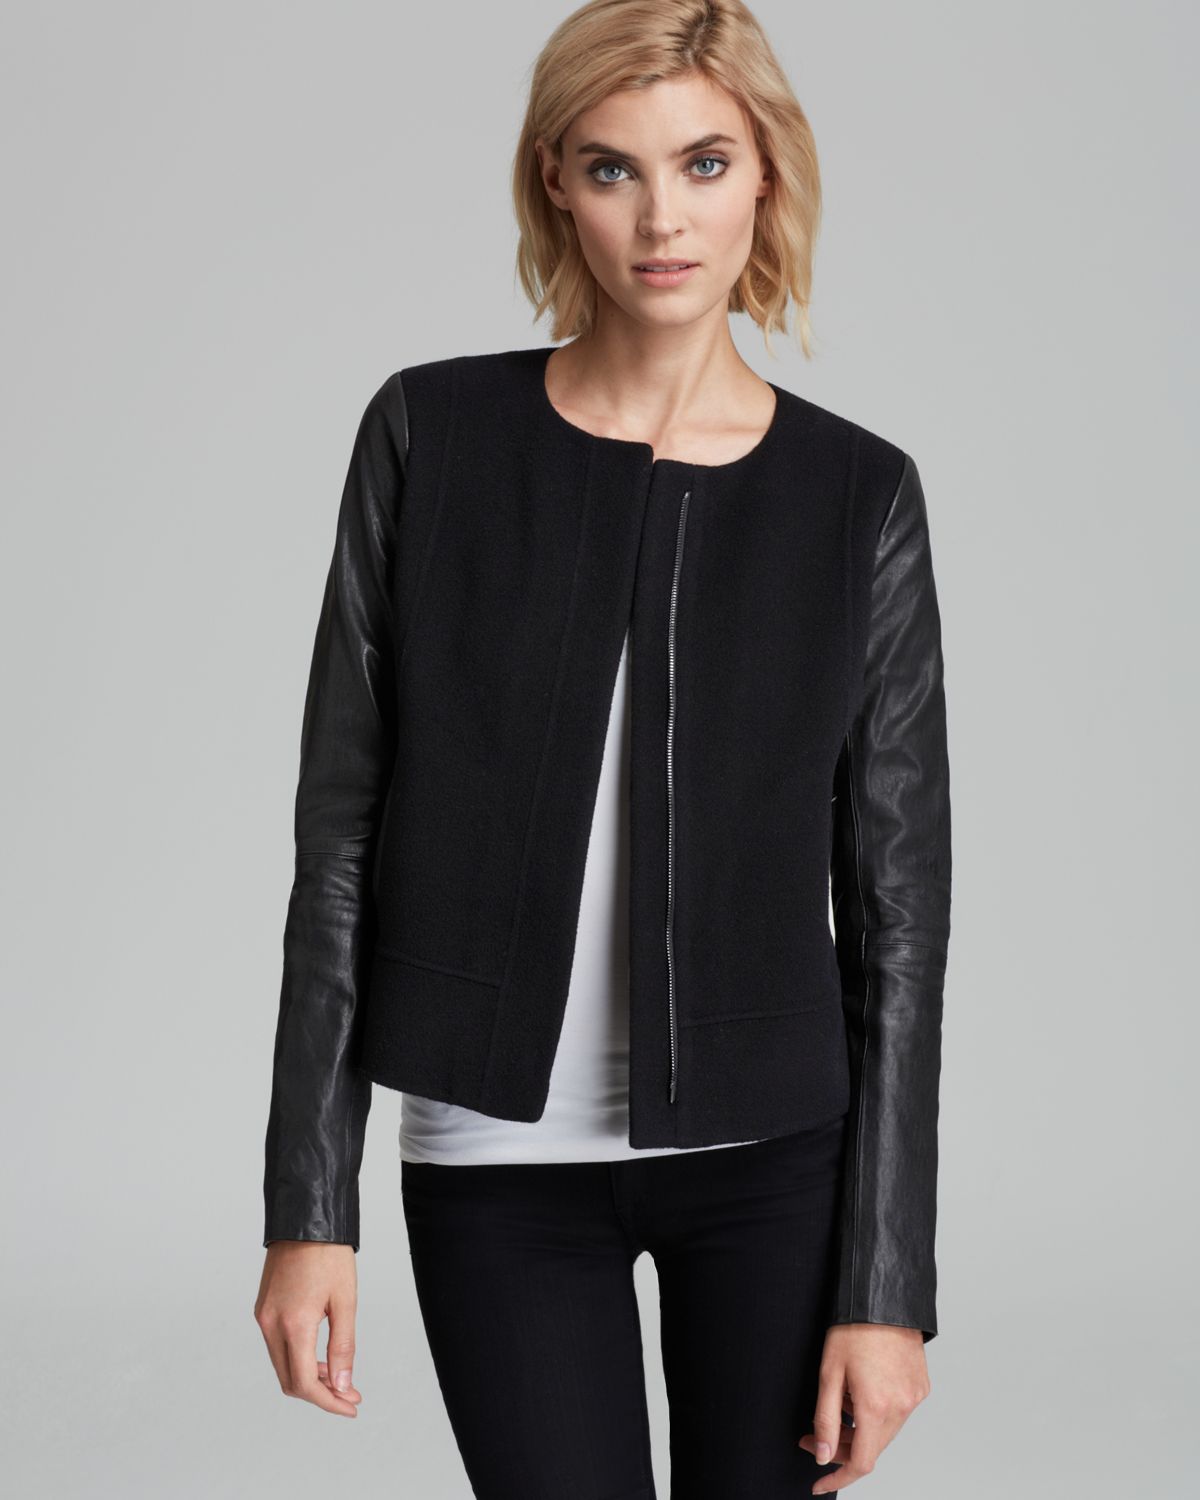 Lyst - Vince Jacket Leather Sleeve in Black